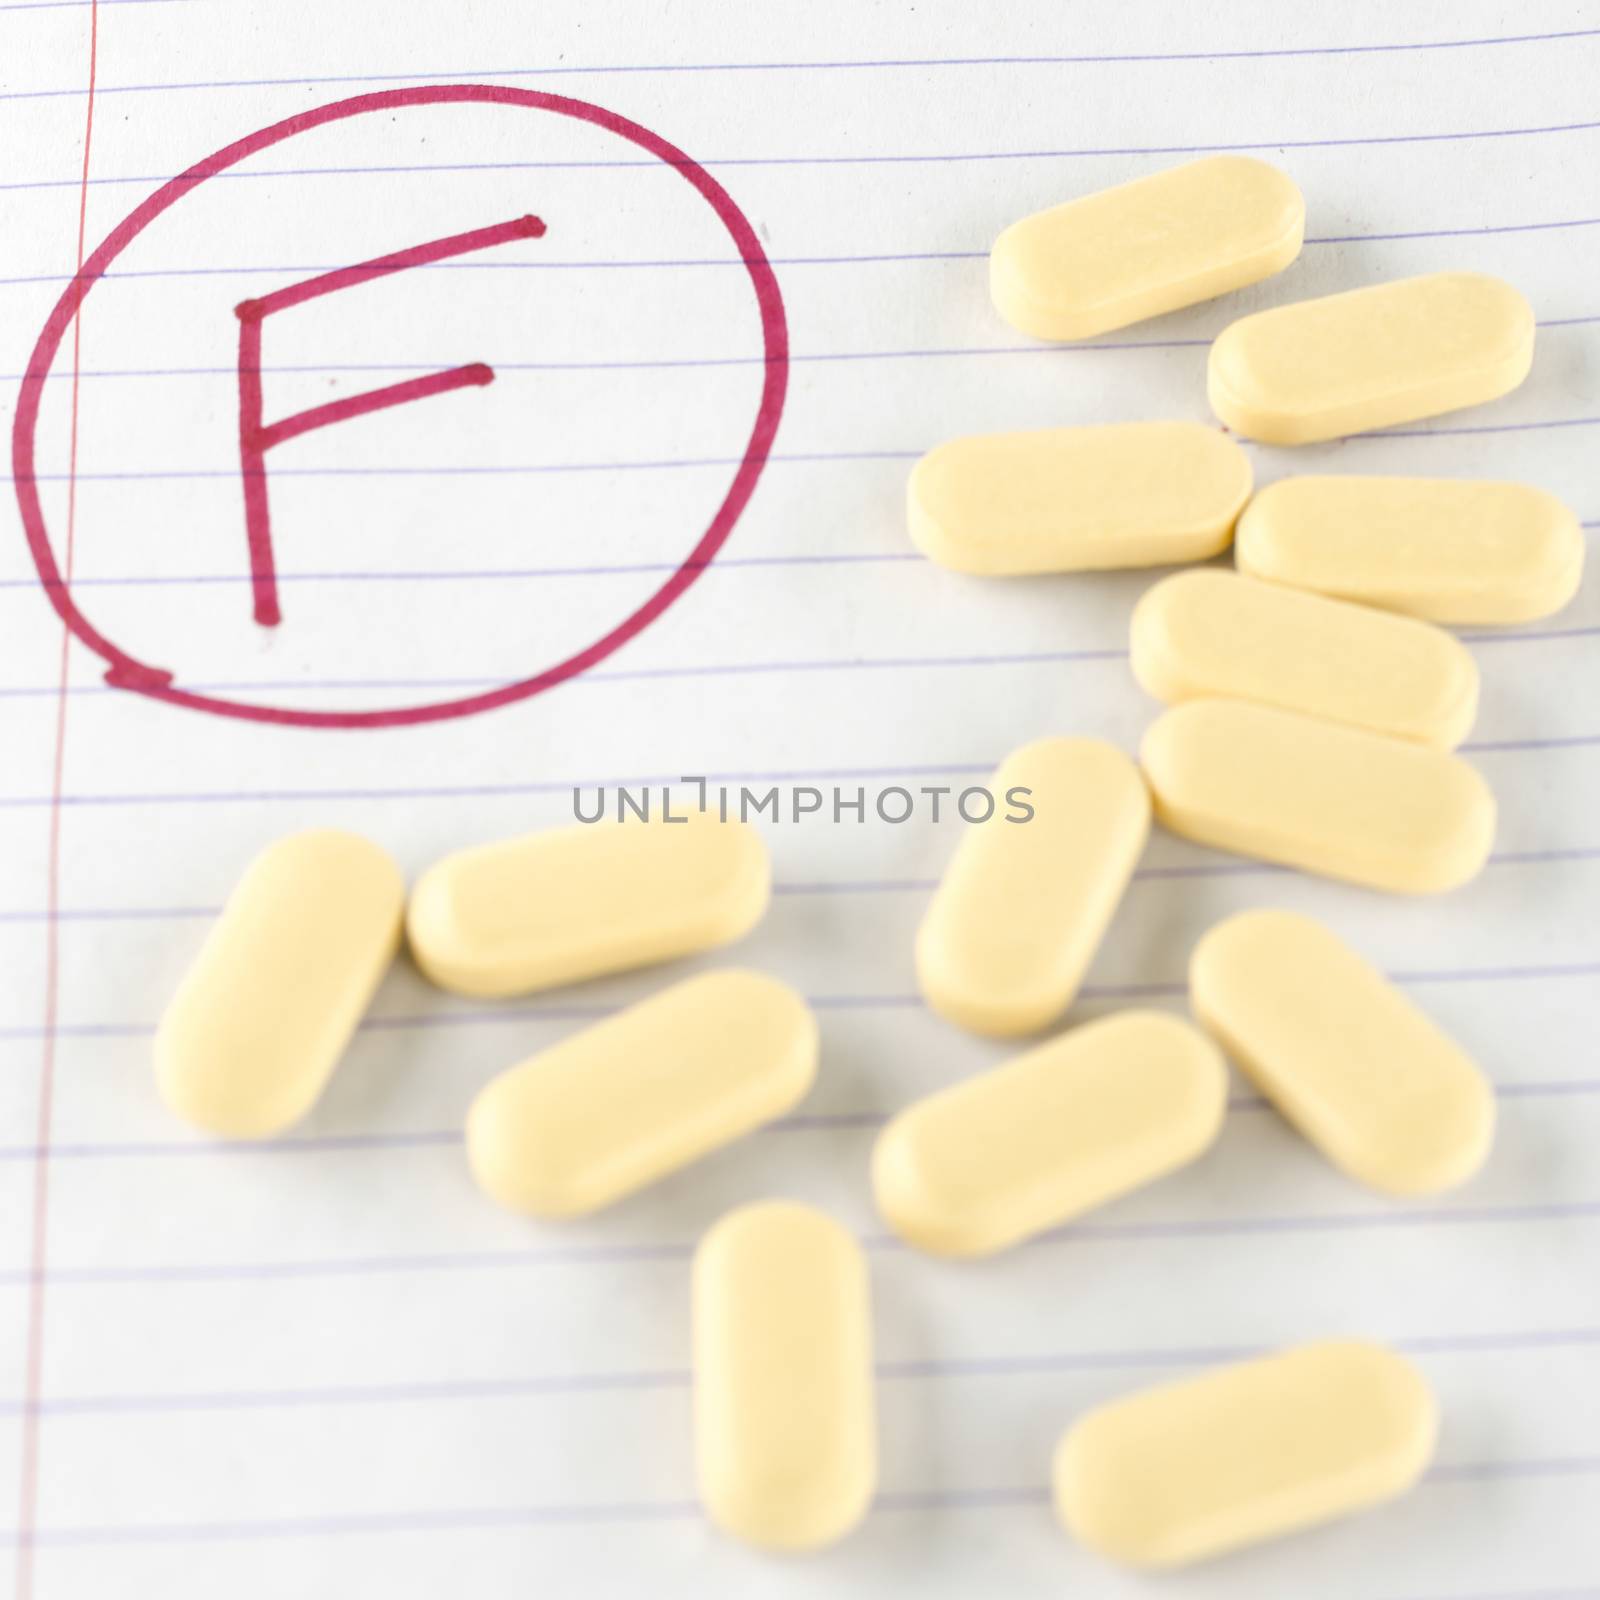 grade f with drug by ammza12